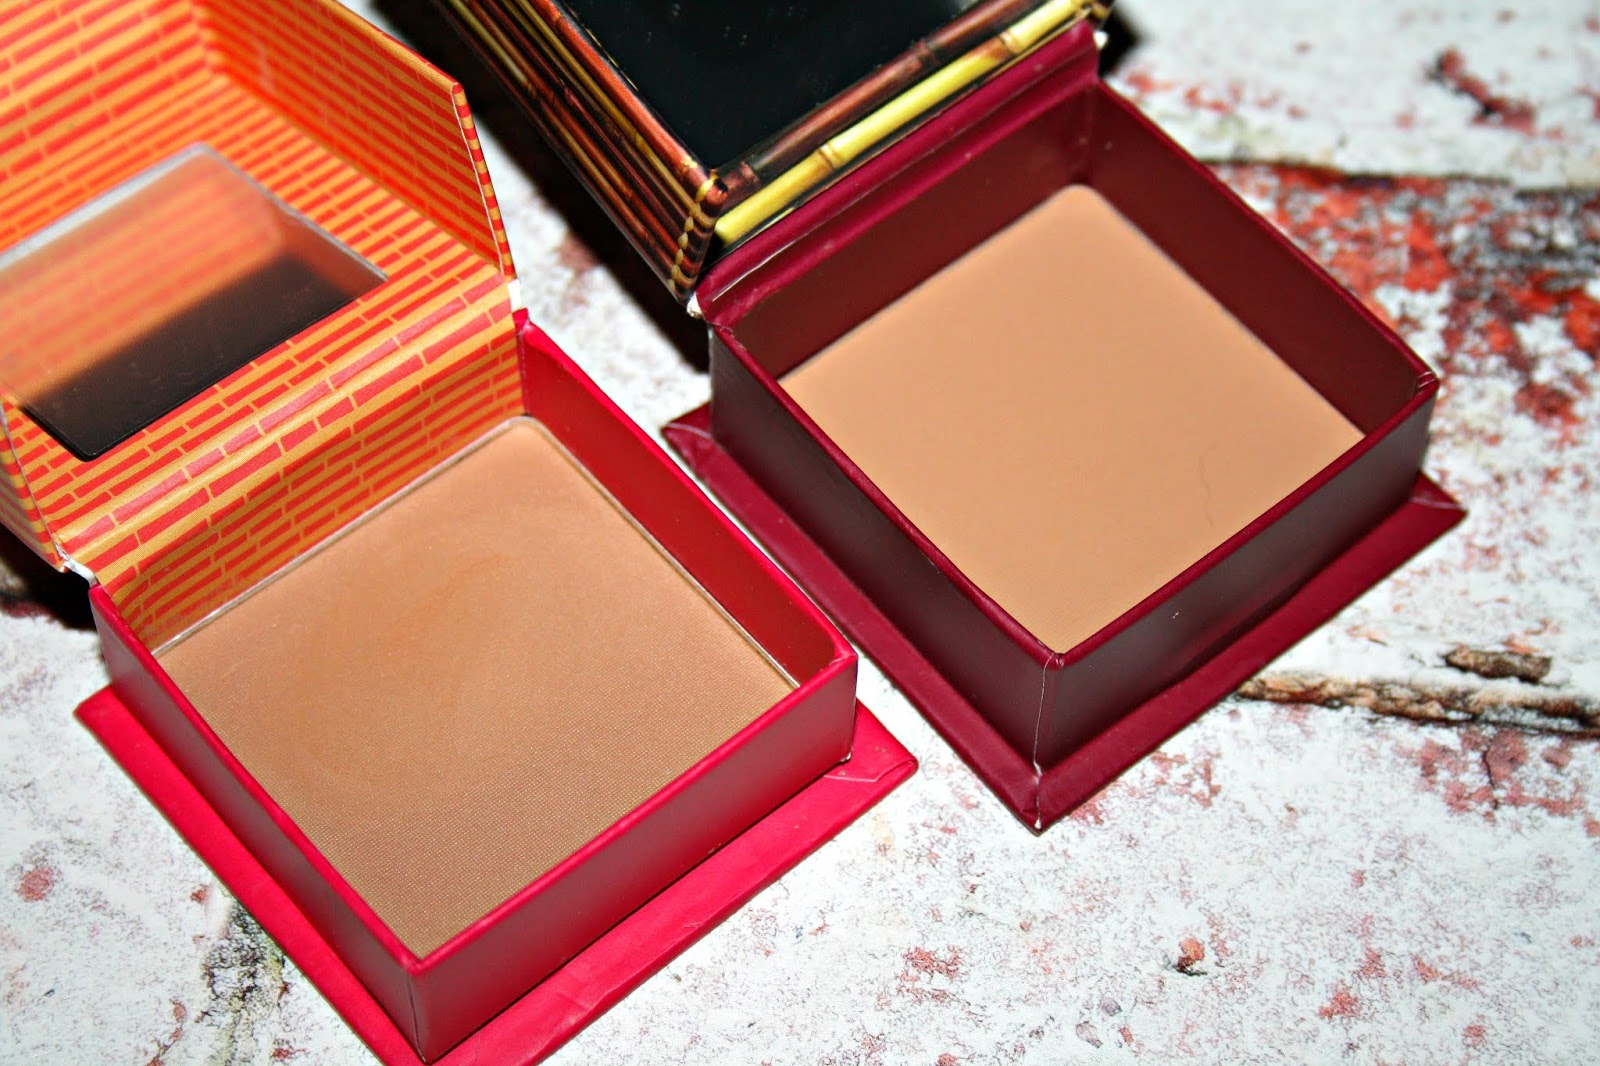 læsning emne Stol Beautyqueenuk | A UK Beauty and Lifestyle Blog: Aldi Lacura Aloha Bronzer -  Is it a dupe for Benefit Hoola?